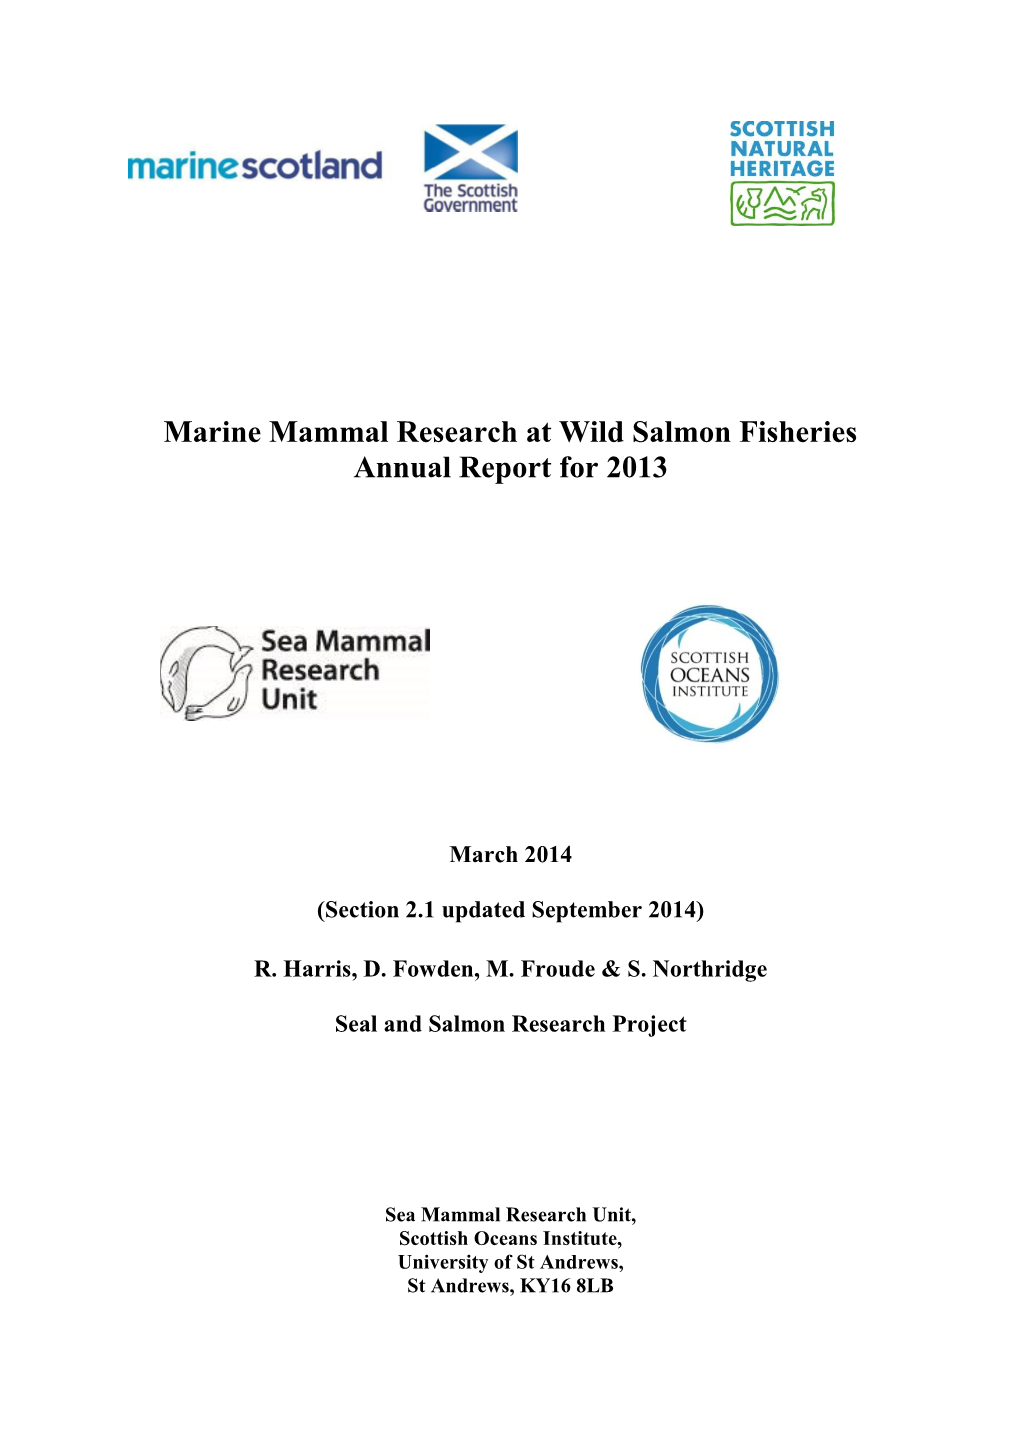 Marine Mammal Research at Wild Salmon Fisheries Annual Report for 2013